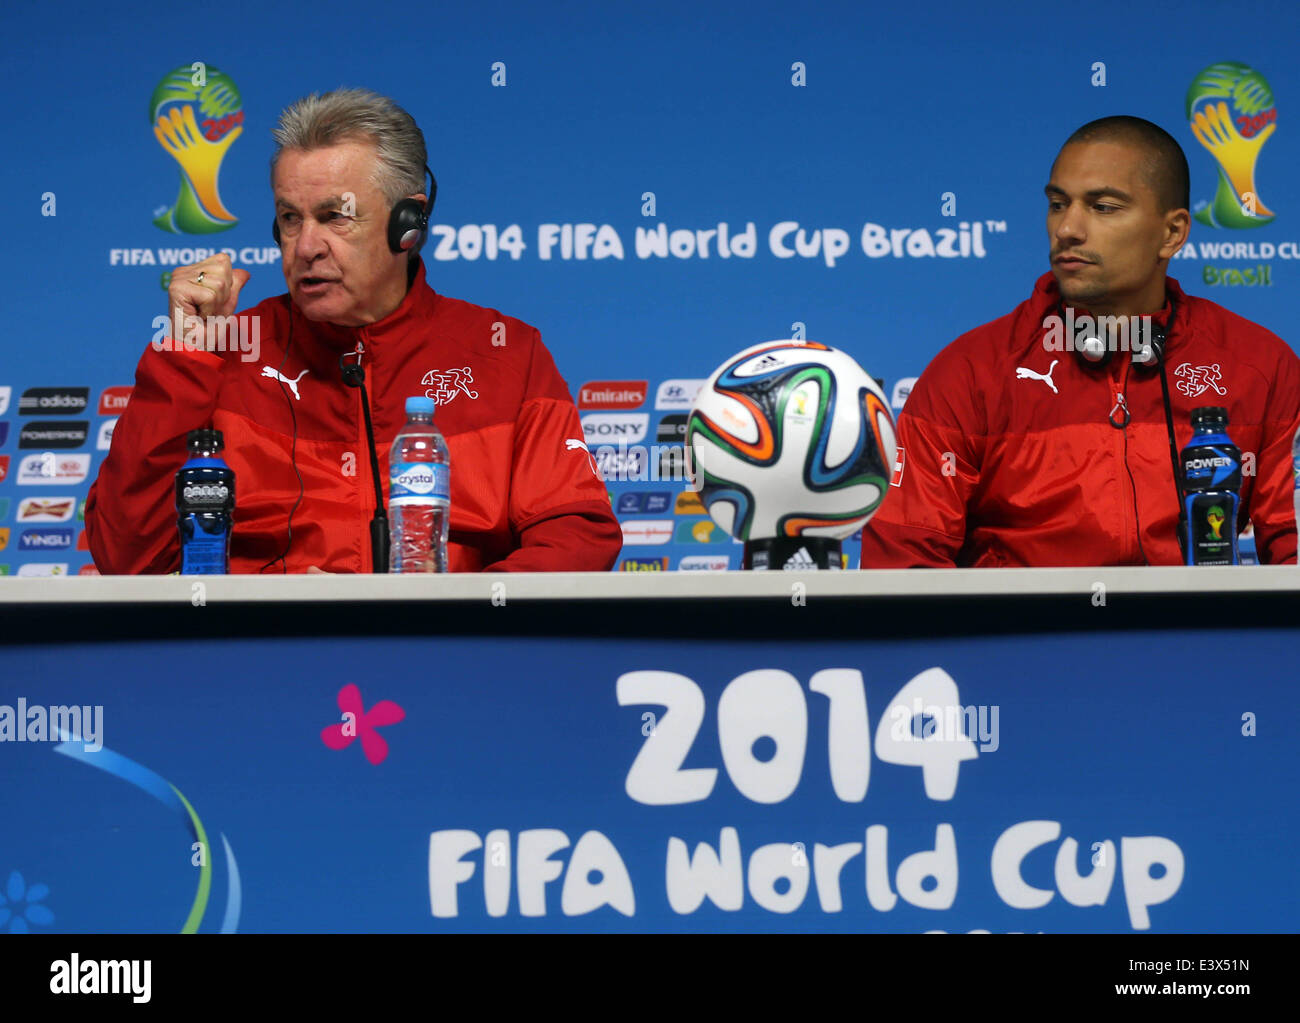 Sao Paulo, Brazil. 30th June, 2014. Switzerland's Ottmar Hitzfeld (L) attends a press conference in Sao Paulo, Brazil, on June 30, 2014. Switzerland will face Argentina here in a Round of 16 match of 2014 FIFA World Cup on Tuesday. © TELAM/Xinhua/Alamy Live News Stock Photo